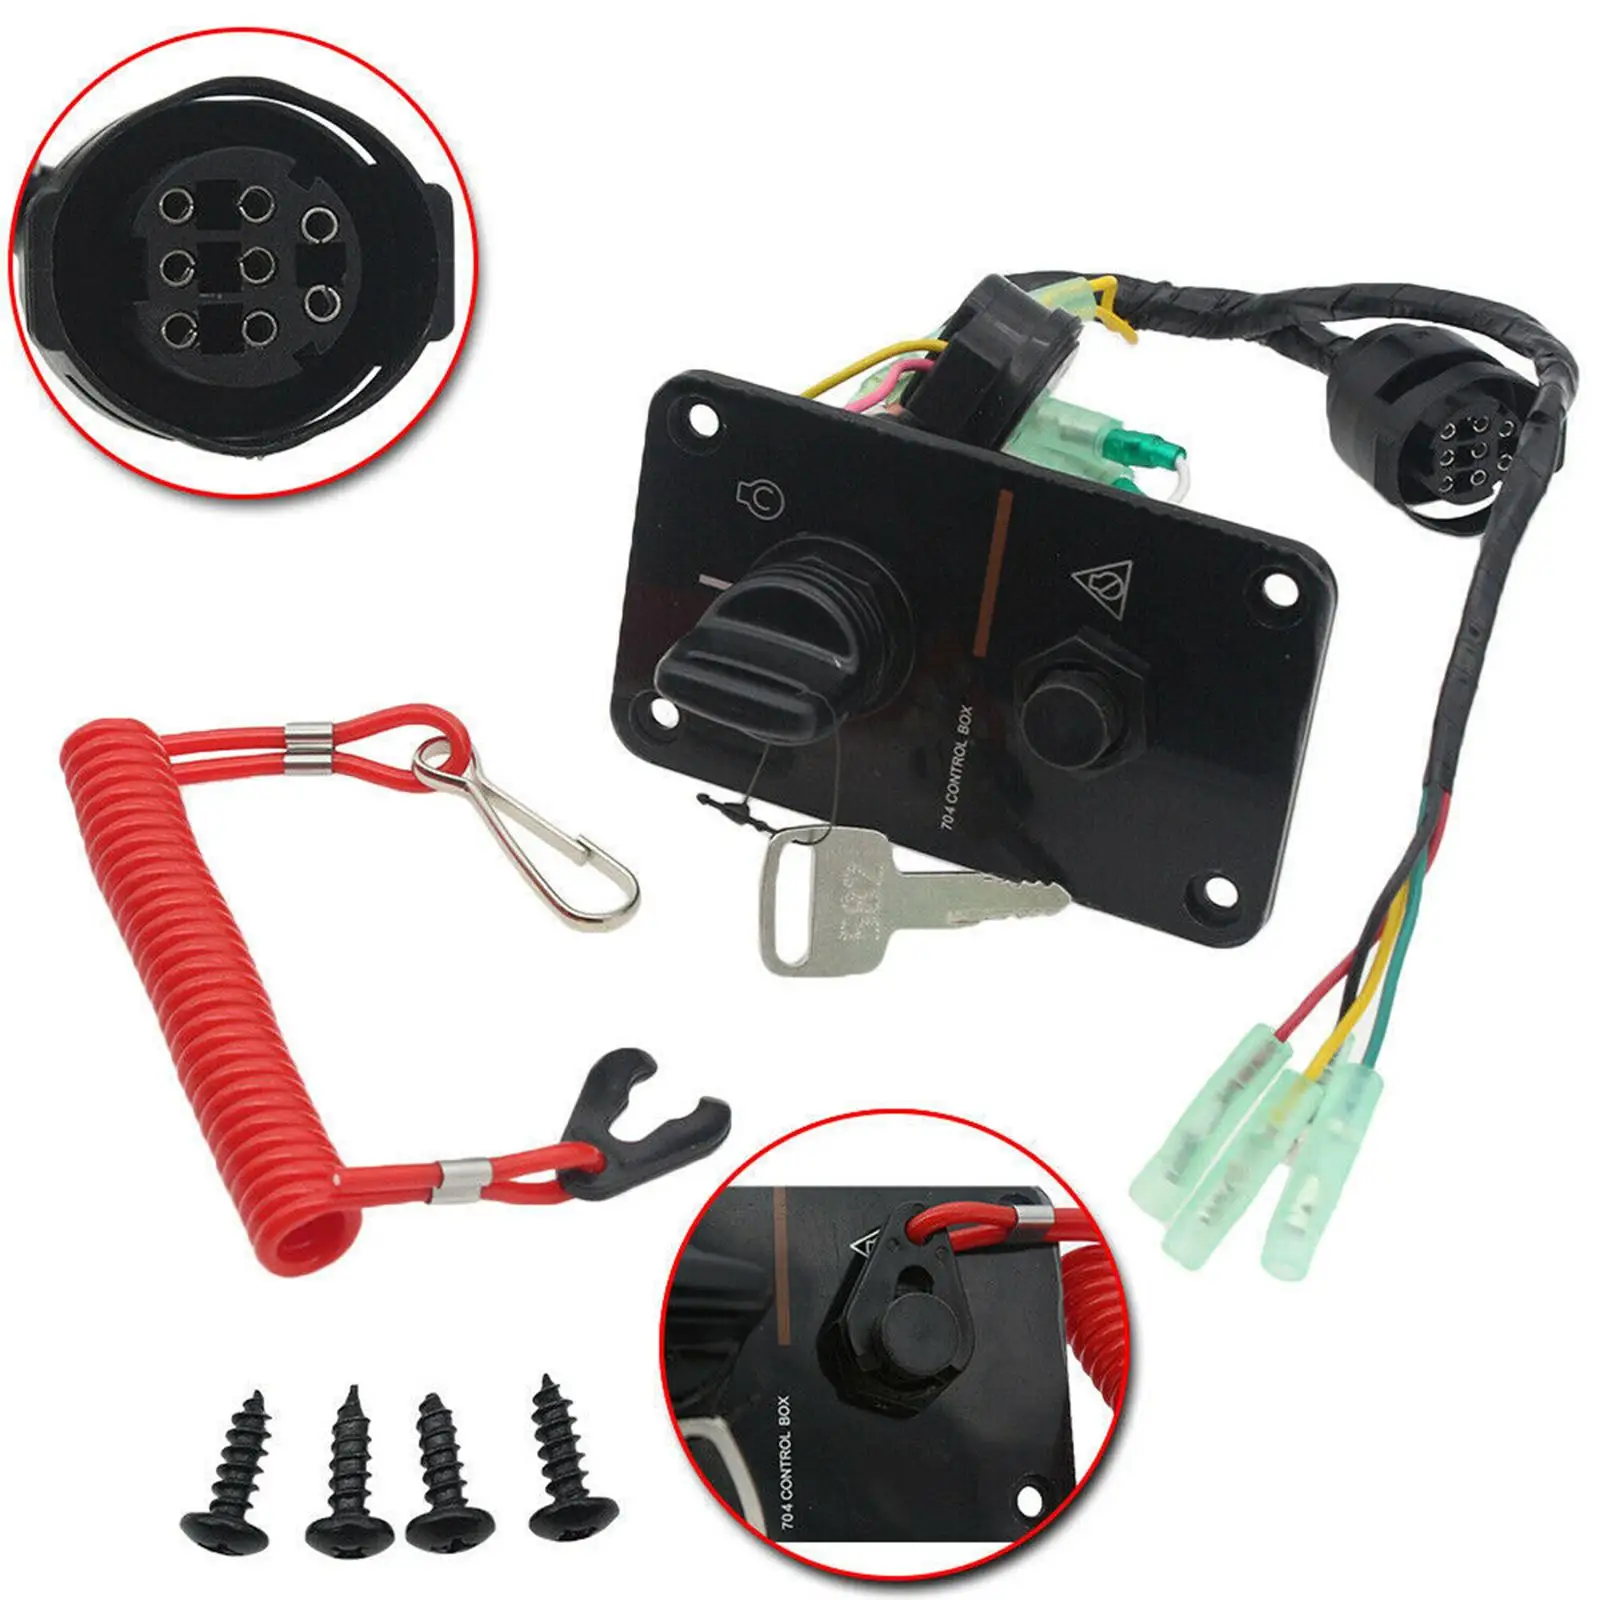 Outboard Single Engine Ignition Key Switch Panel, Fit for Yamaha Outboard Motors with Stop Switch Lanyard Assy 704 Control Box